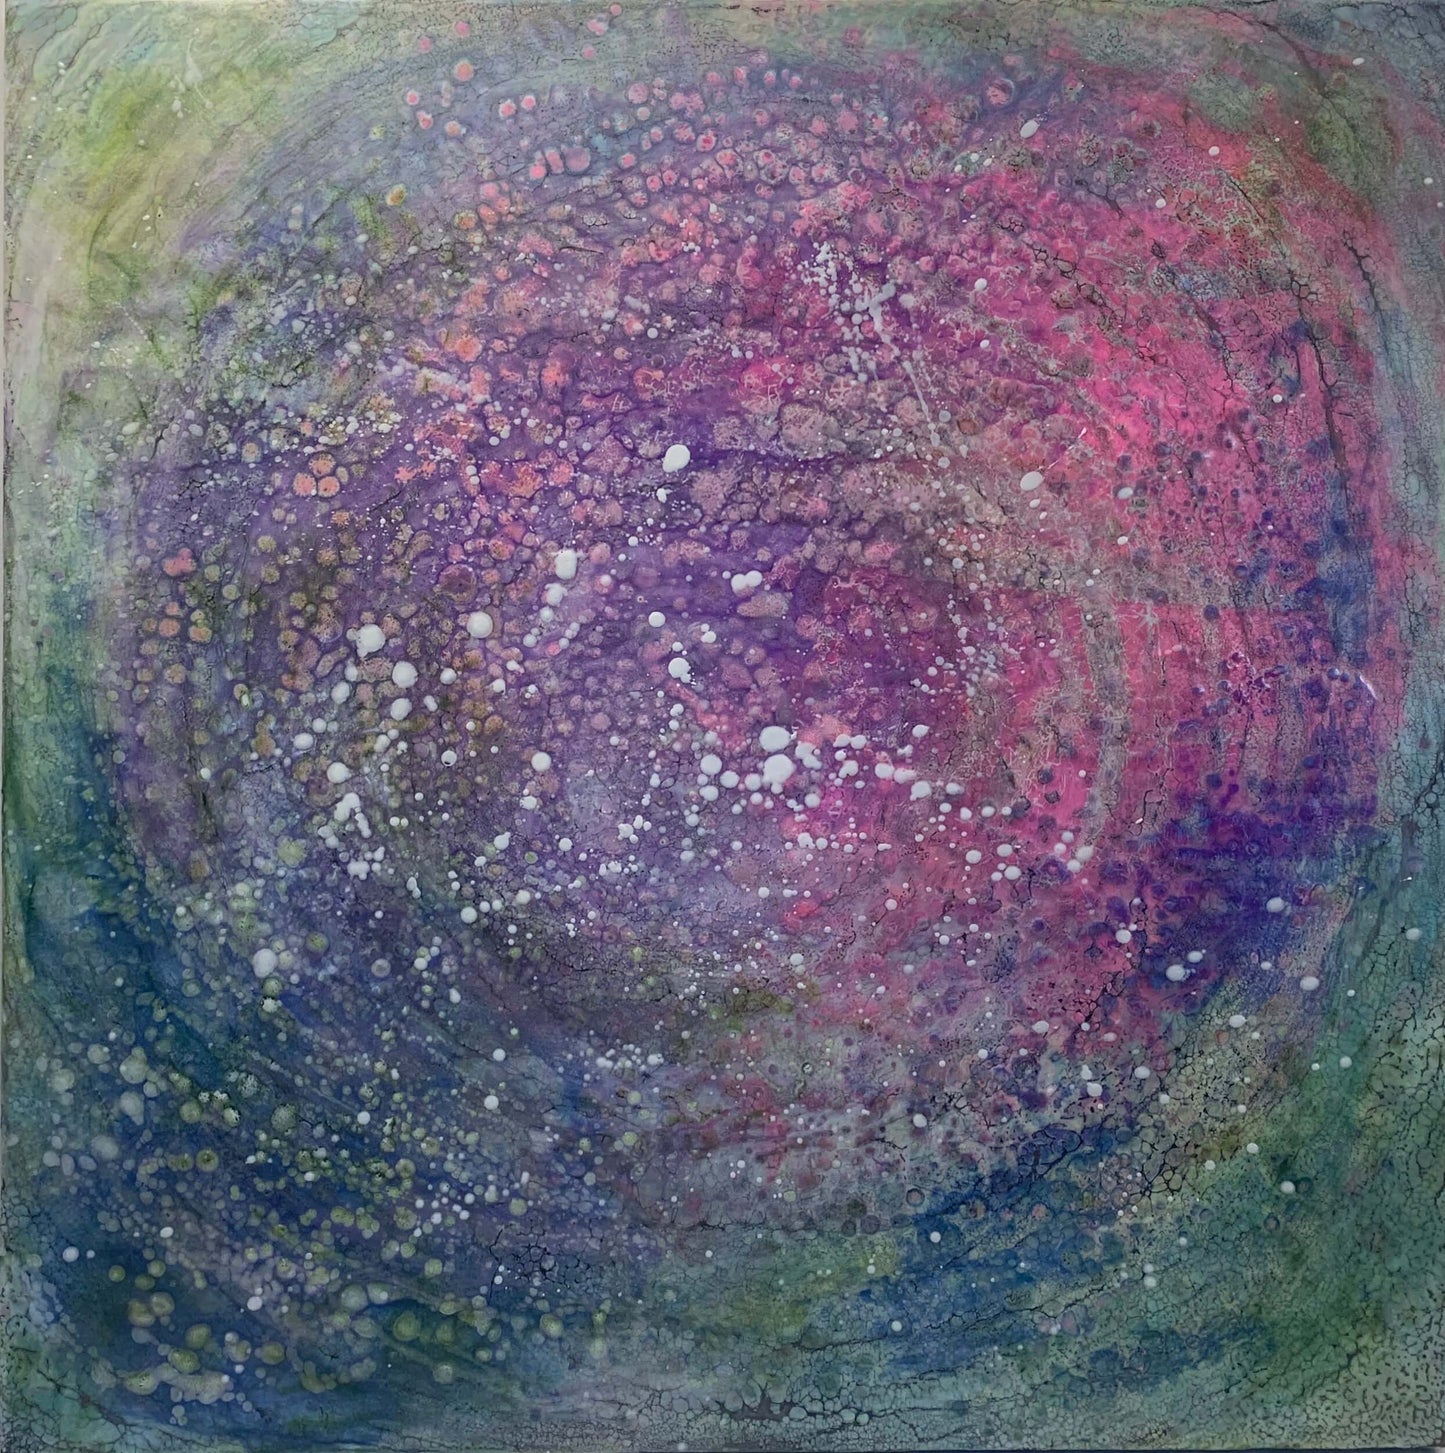 Abstract Encaustic Painting, 30x30in.  Created with beeswax, damar resin, dry pigments and shellac on cradled wood panel. This piece is vibrant with variations of greens, pinks, blues and intricate lace-like texture.  The painting has a hypnotizing and energizing feel to it.   Hanging hardware is included 